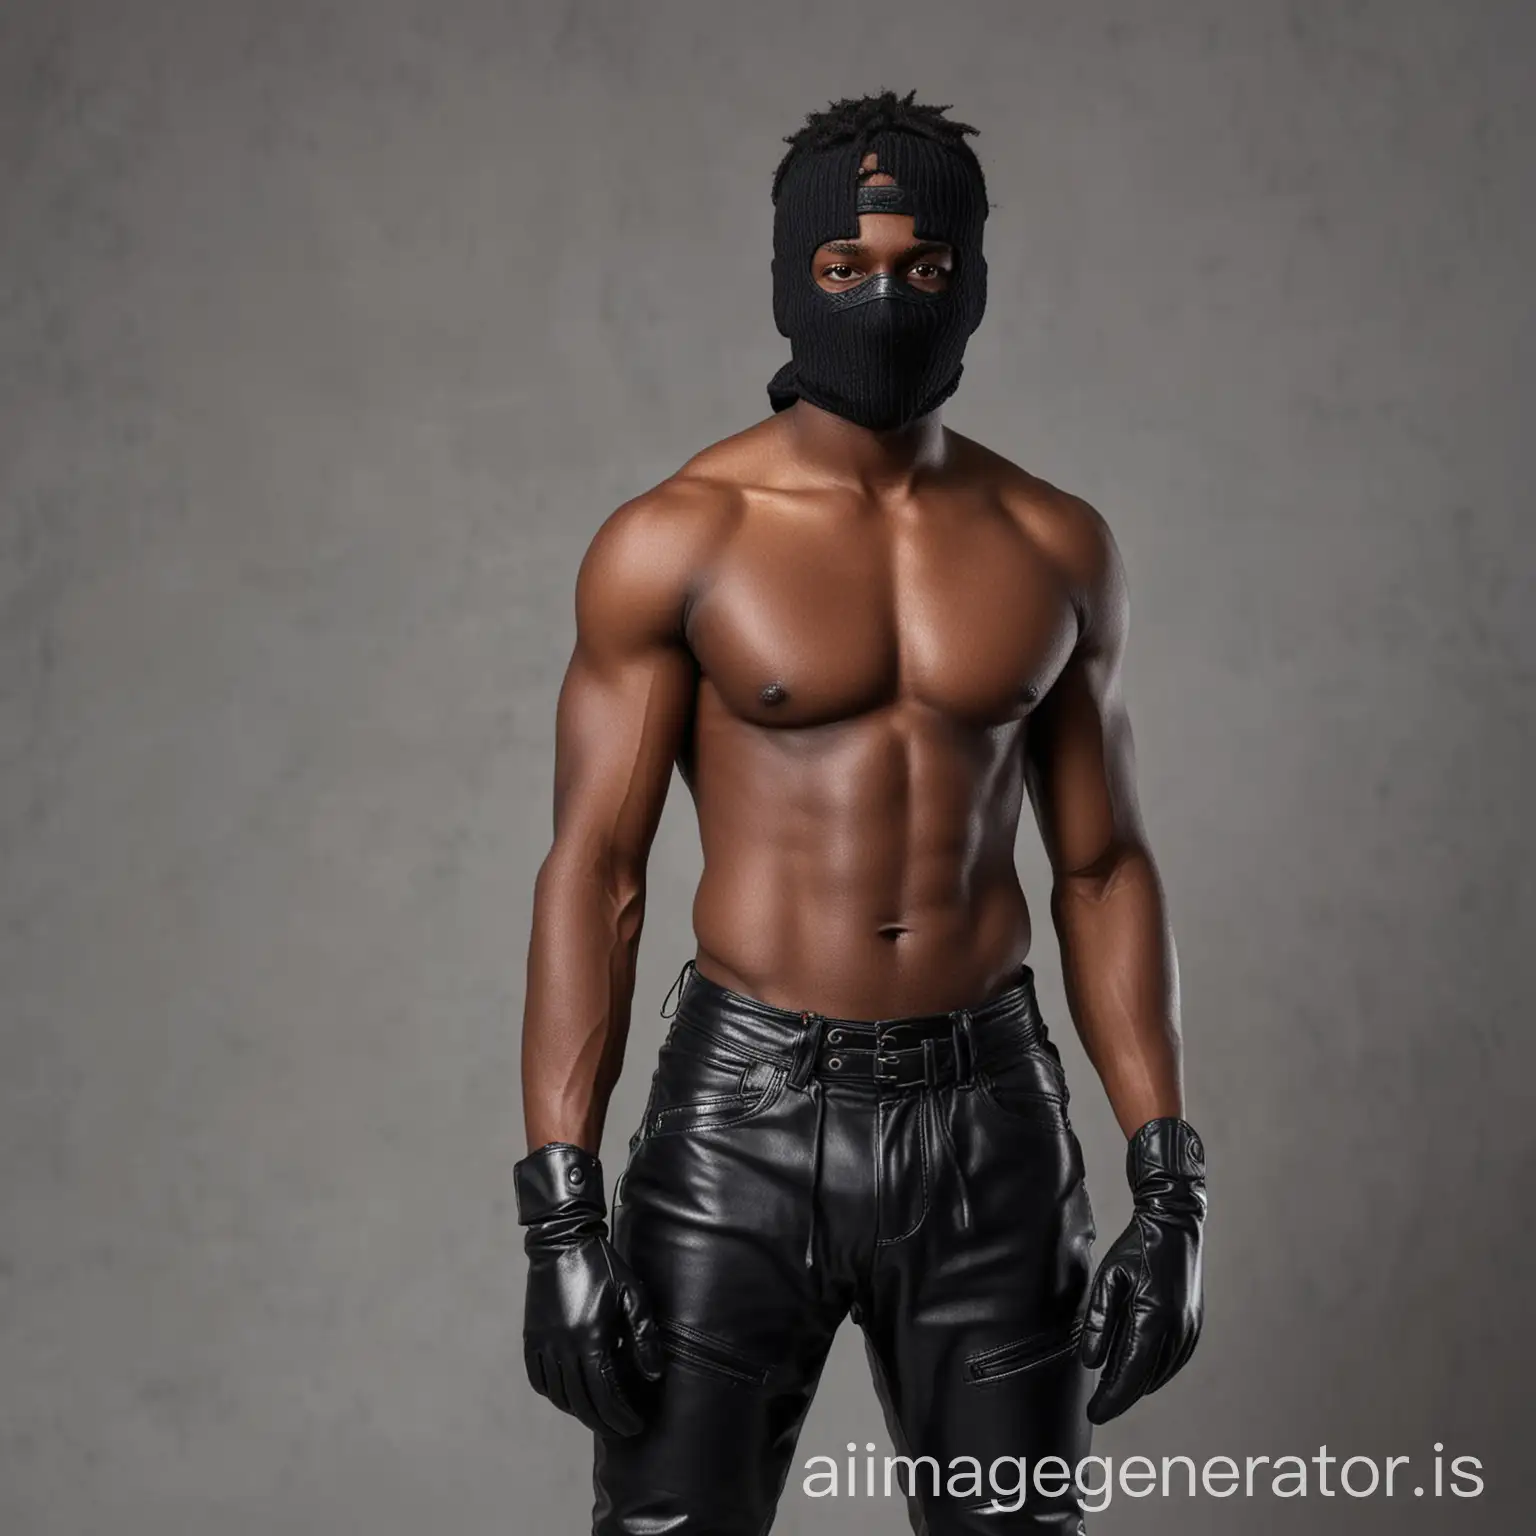 Young-Muscular-Black-Man-in-Stealth-Attire